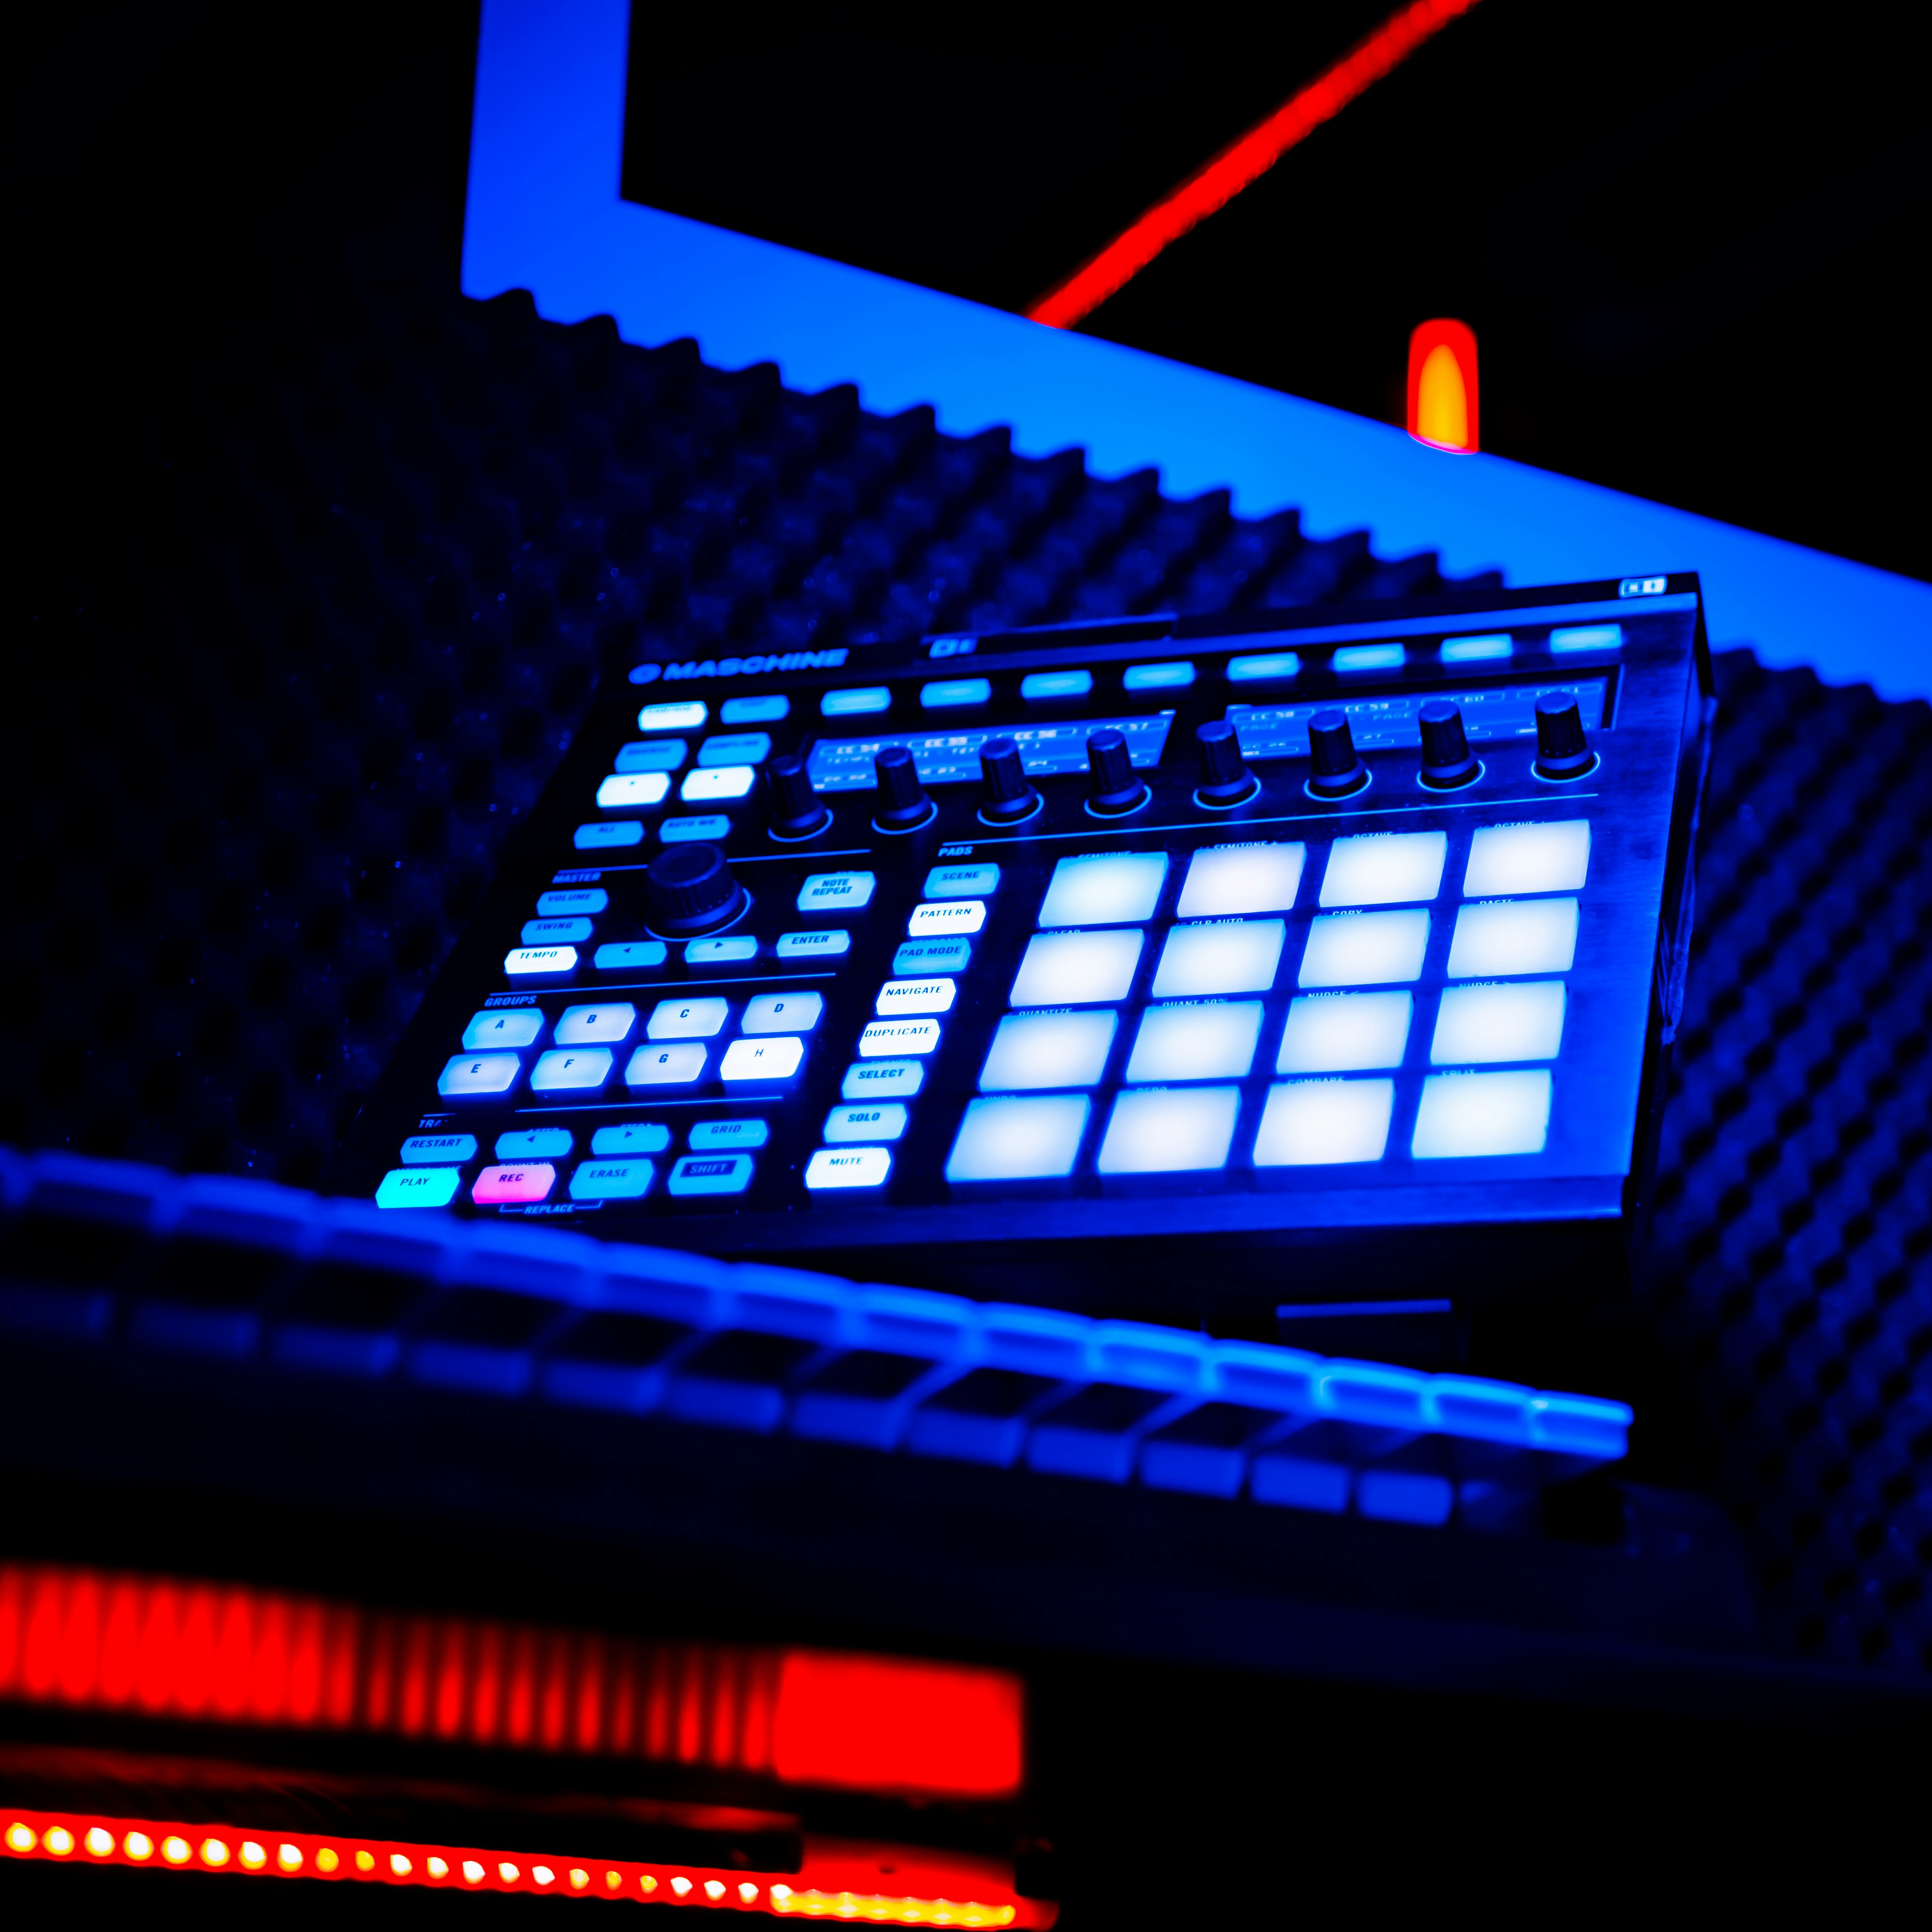 Drum Machine in a recording studio with blue and red neon lights.